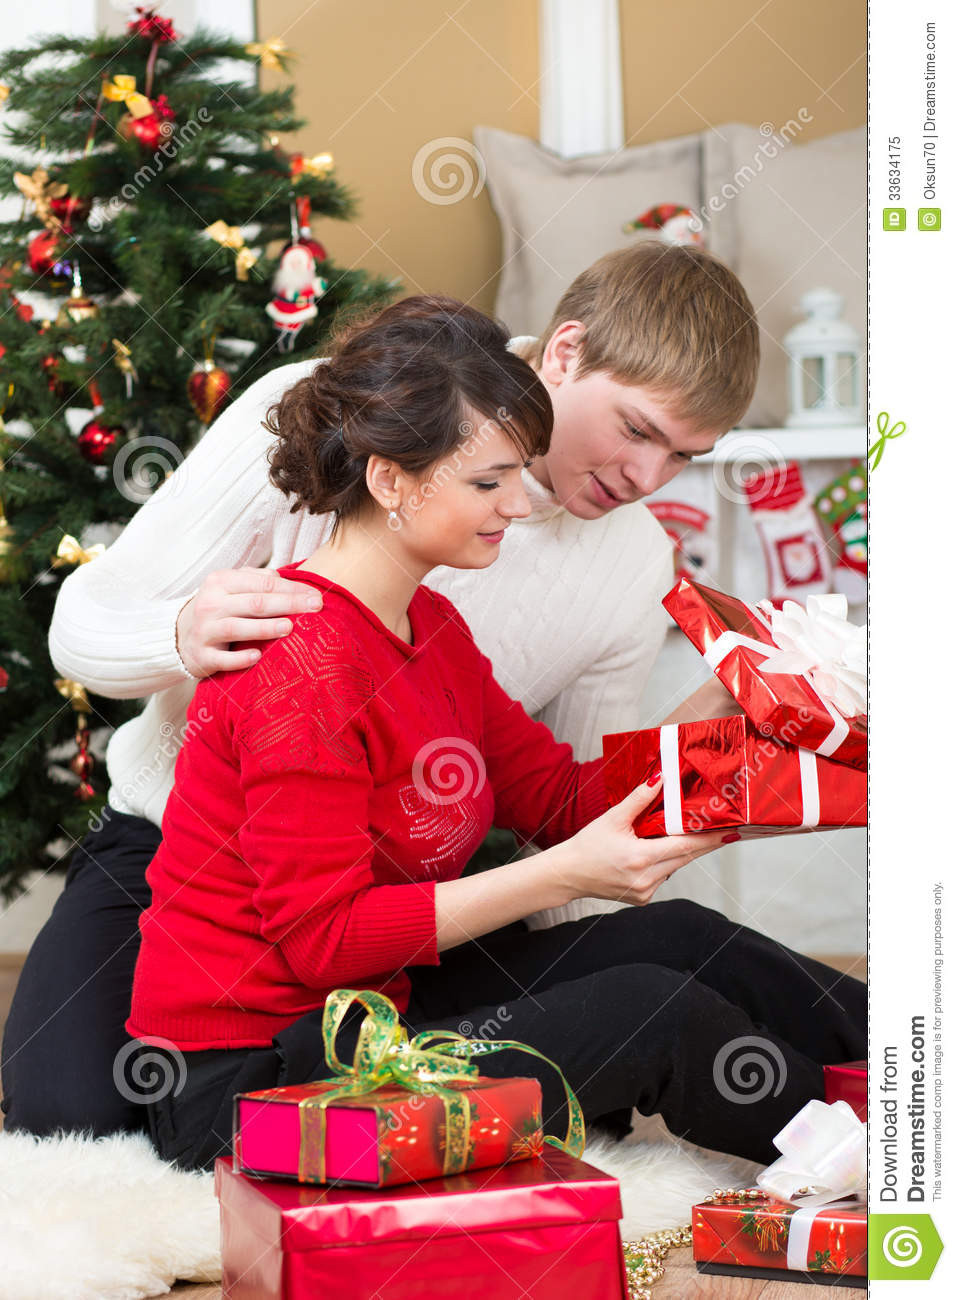 Christmas Gift Ideas Young Couple
 Young Couple With Gifts In Front Christmas Tree Royalty